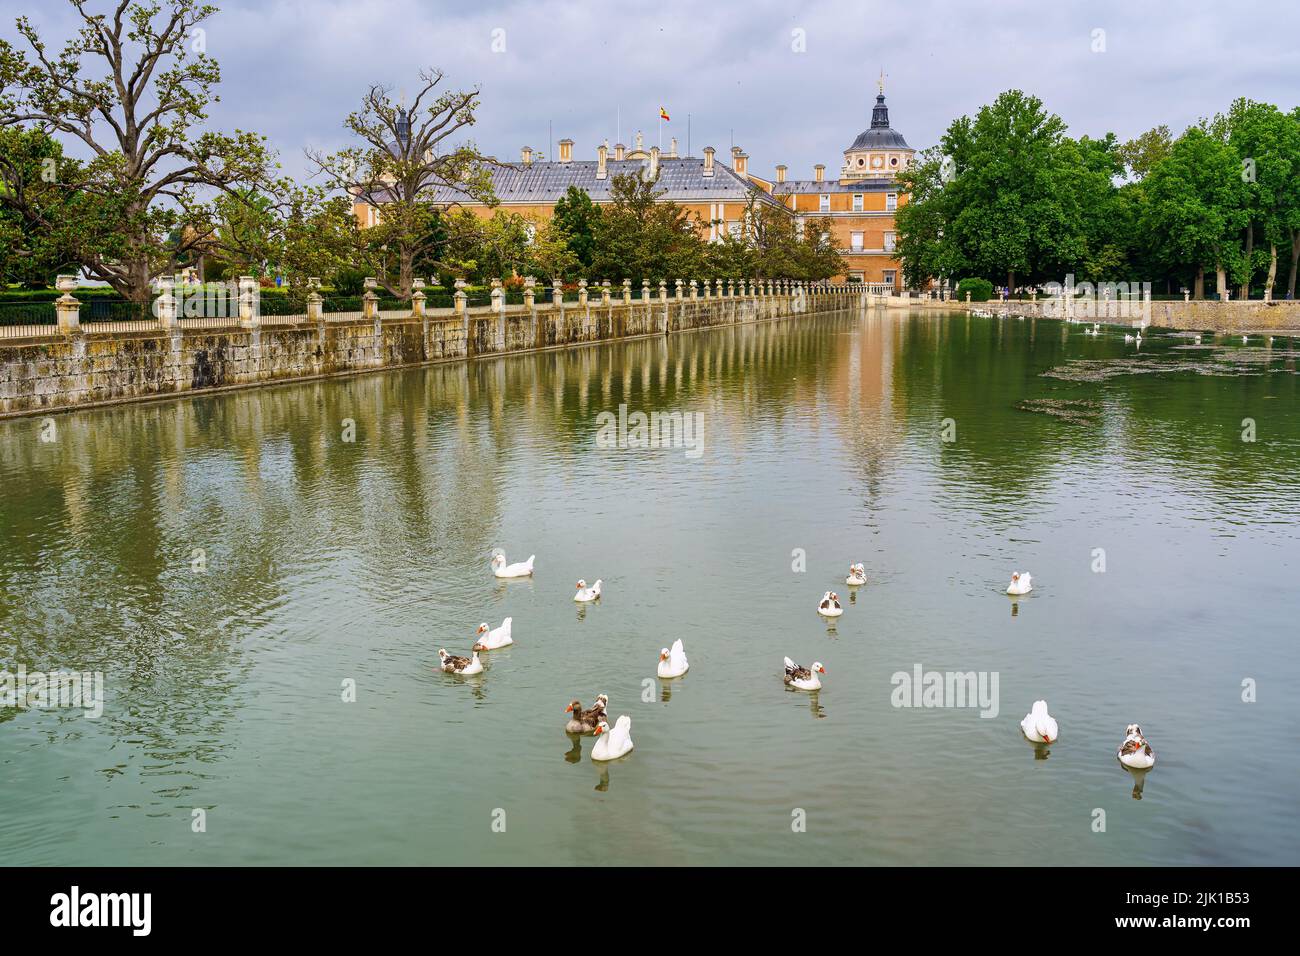 River Tagus as it passes through the royal palace of Aranjuez with white ducks in the water. Stock Photo